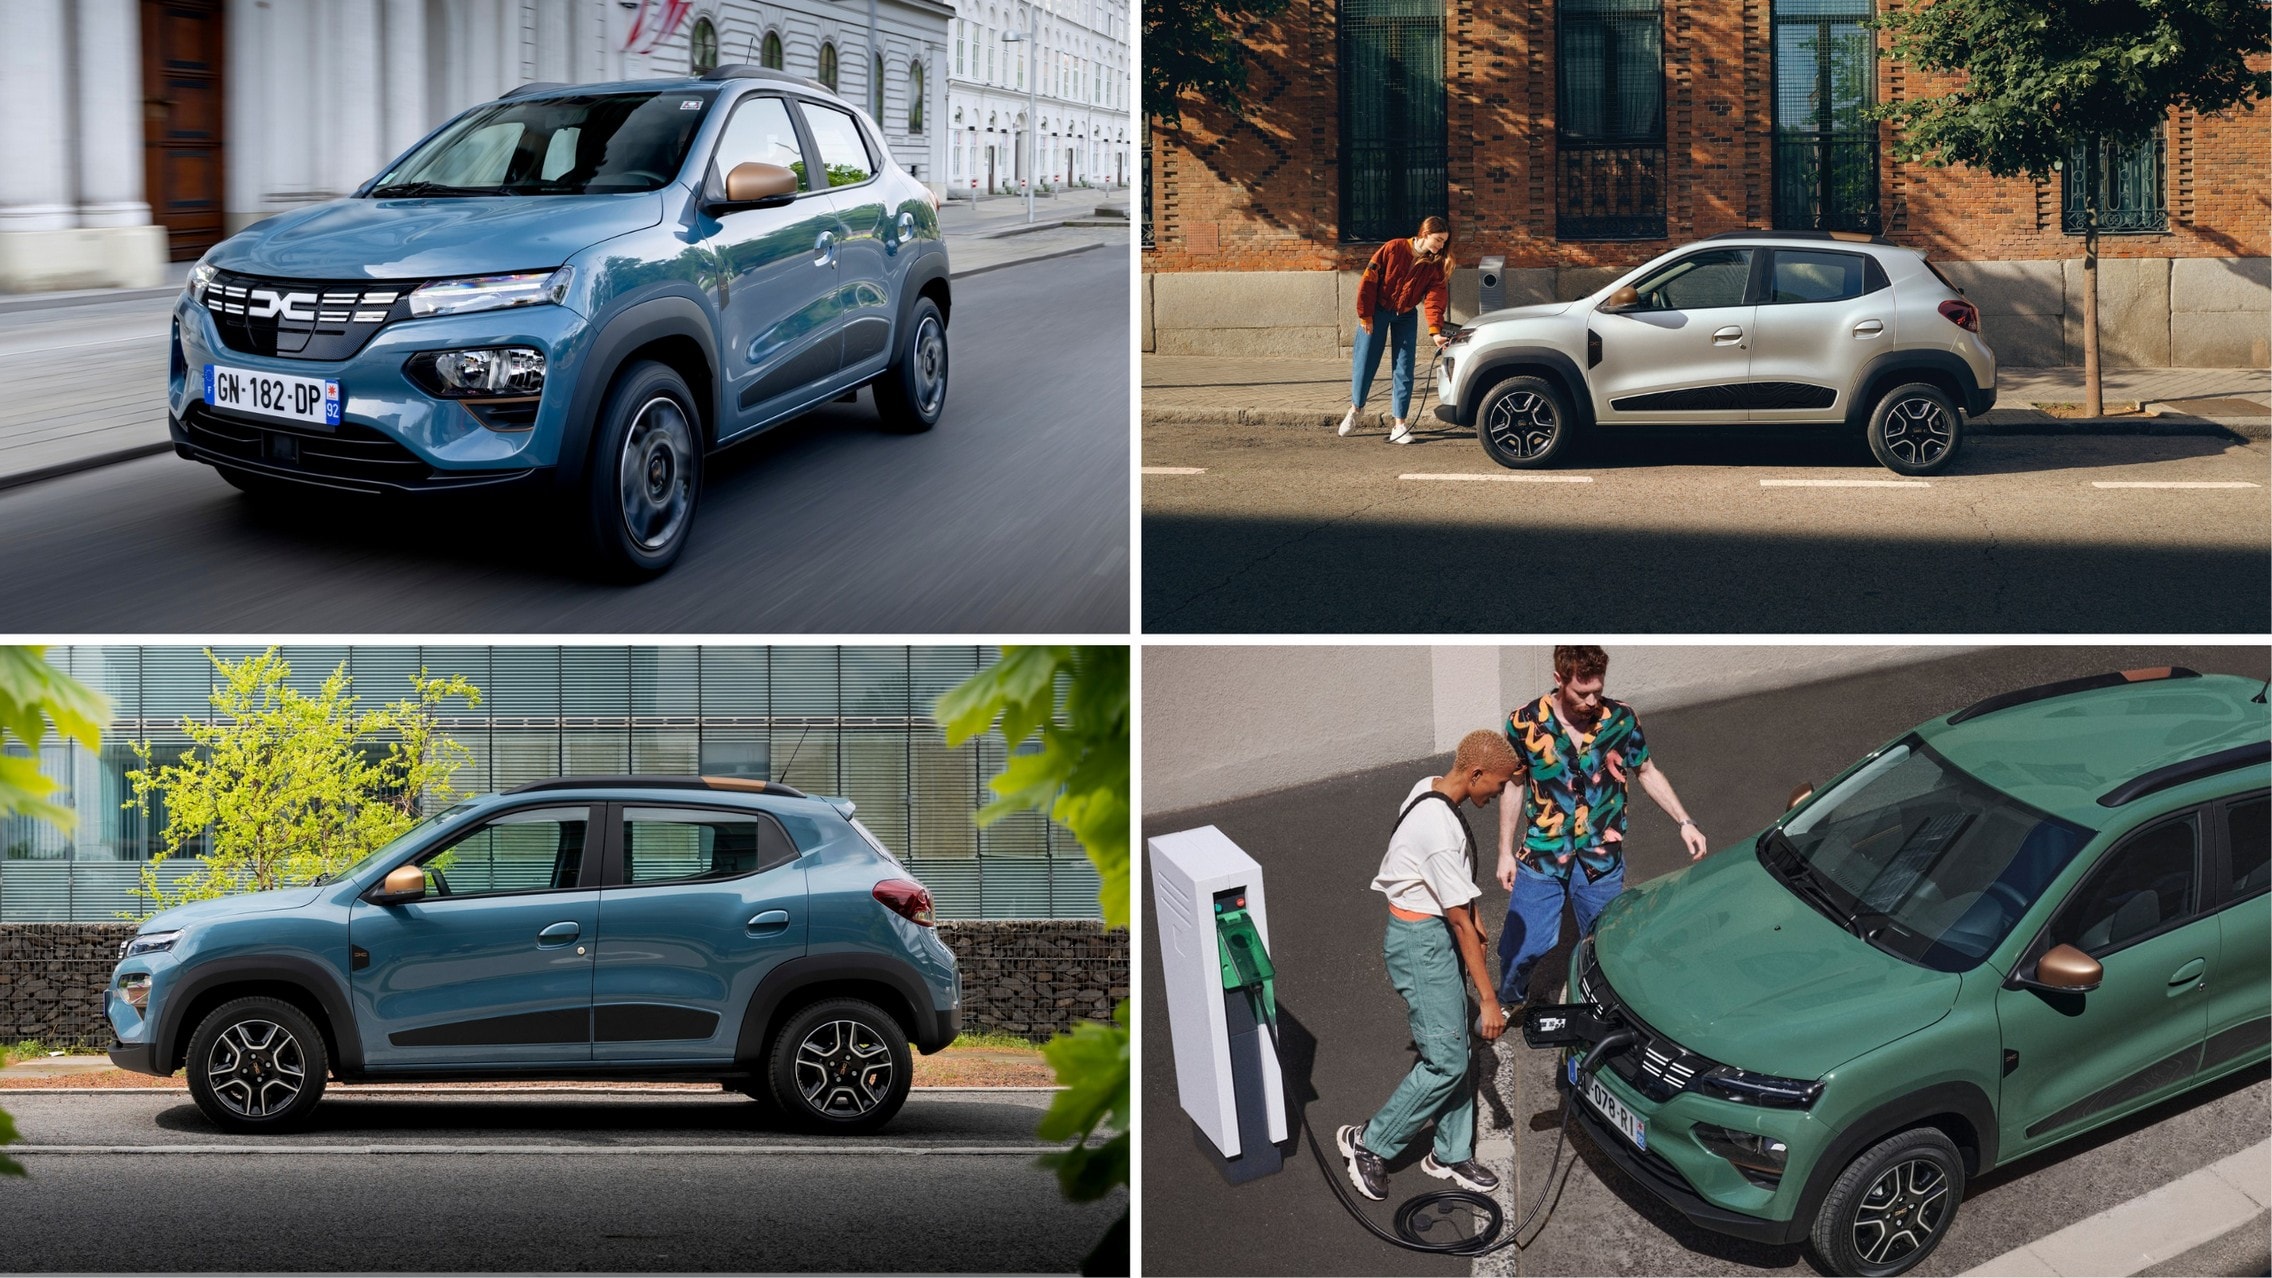 https://s1.cdn.autoevolution.com/images/news/all-new-dacia-spring-with-fresh-design-and-more-equipment-coming-to-uk-in-2024-217636_1.jpg